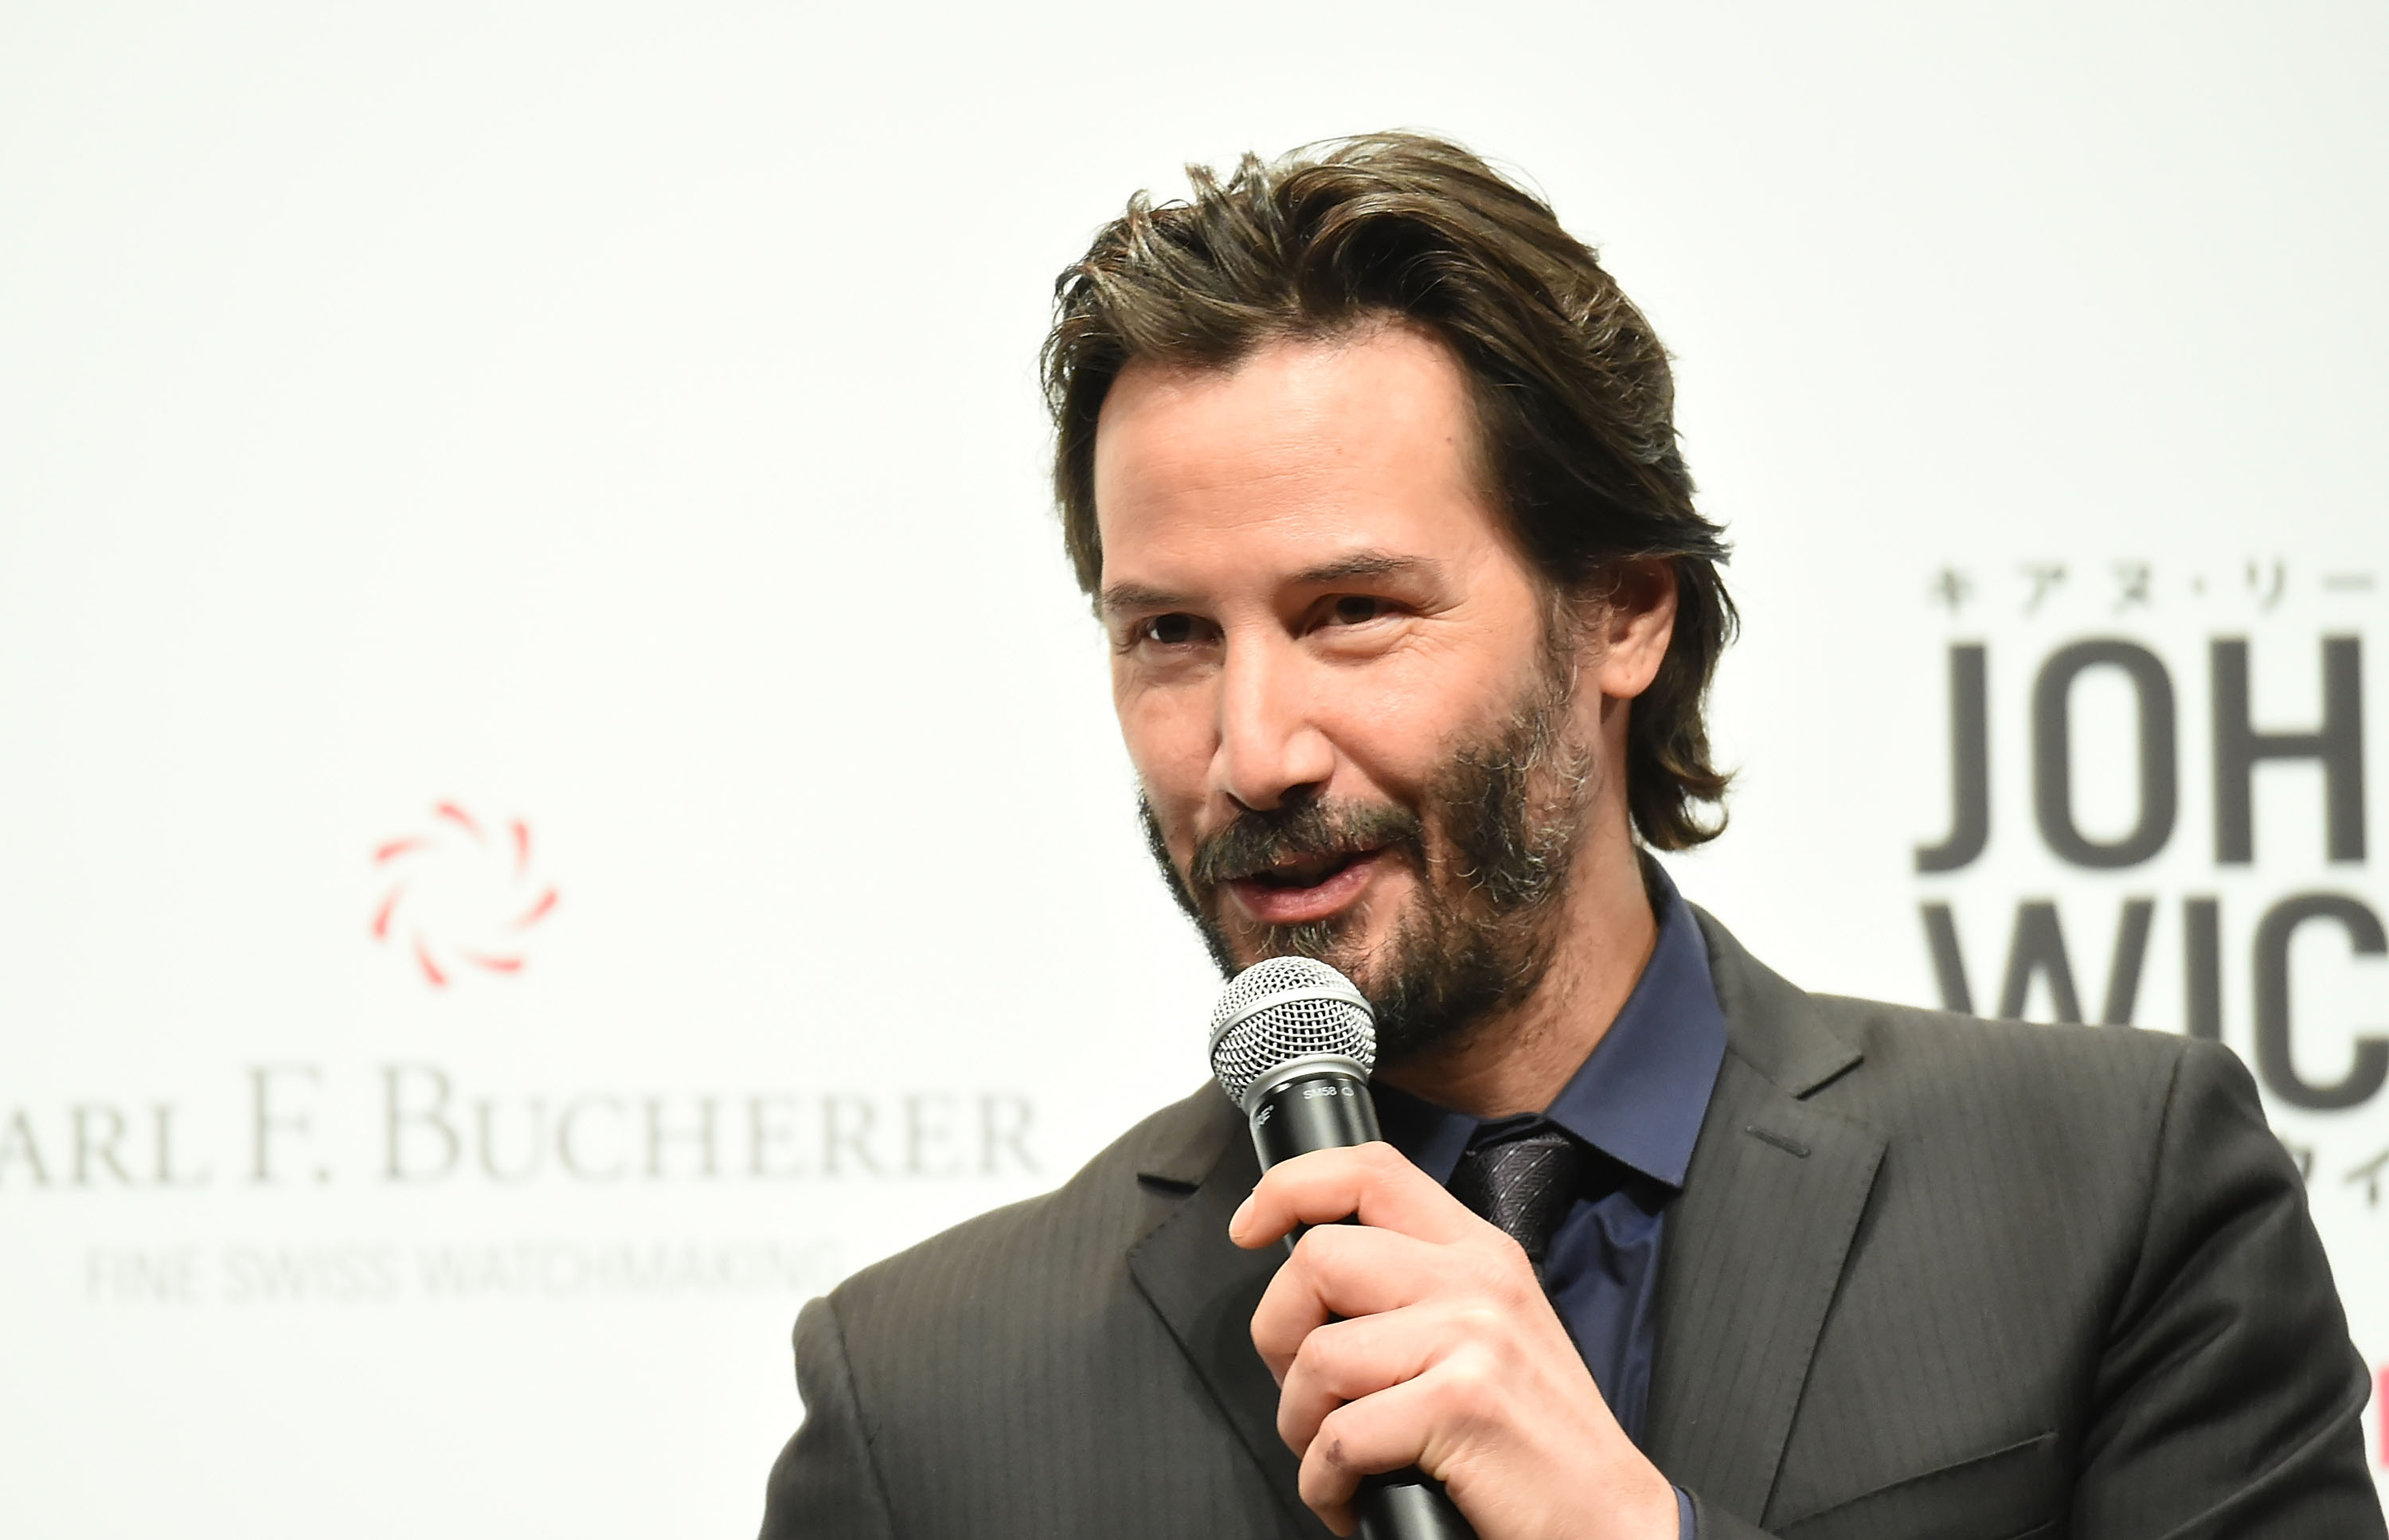 Keanu Reeves attends the 'John Wick' Japan Premiere at Differ Ariake Arena on September 30, 2015 in Tokyo, Japan. (Jun Sato/WireImage)